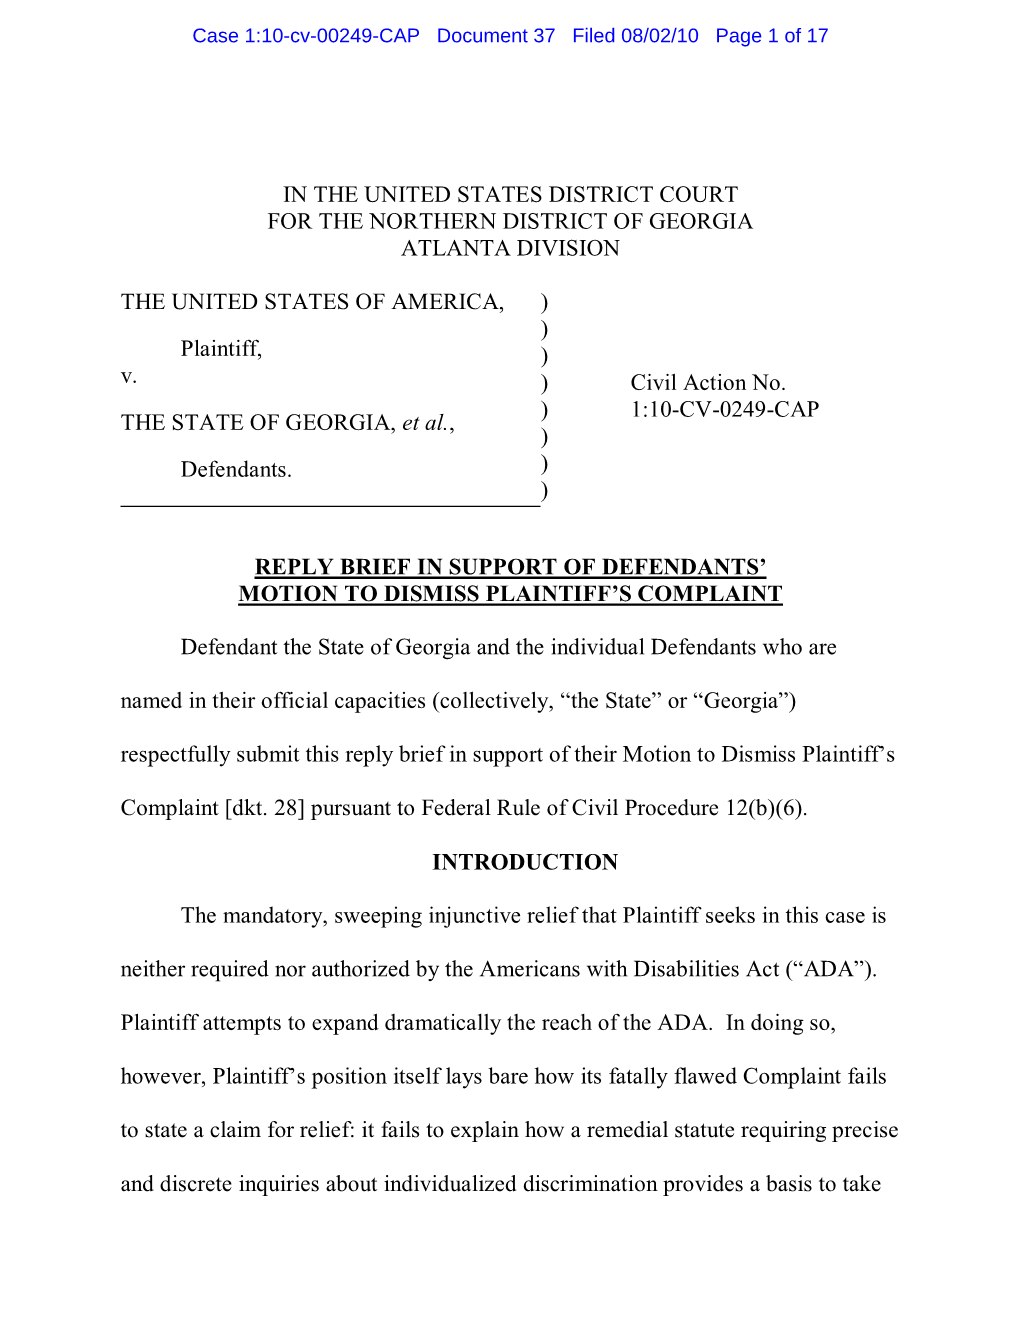 Reply Brief in Support of Defendants' Motion to Dismiss Plaintiff's Complaint